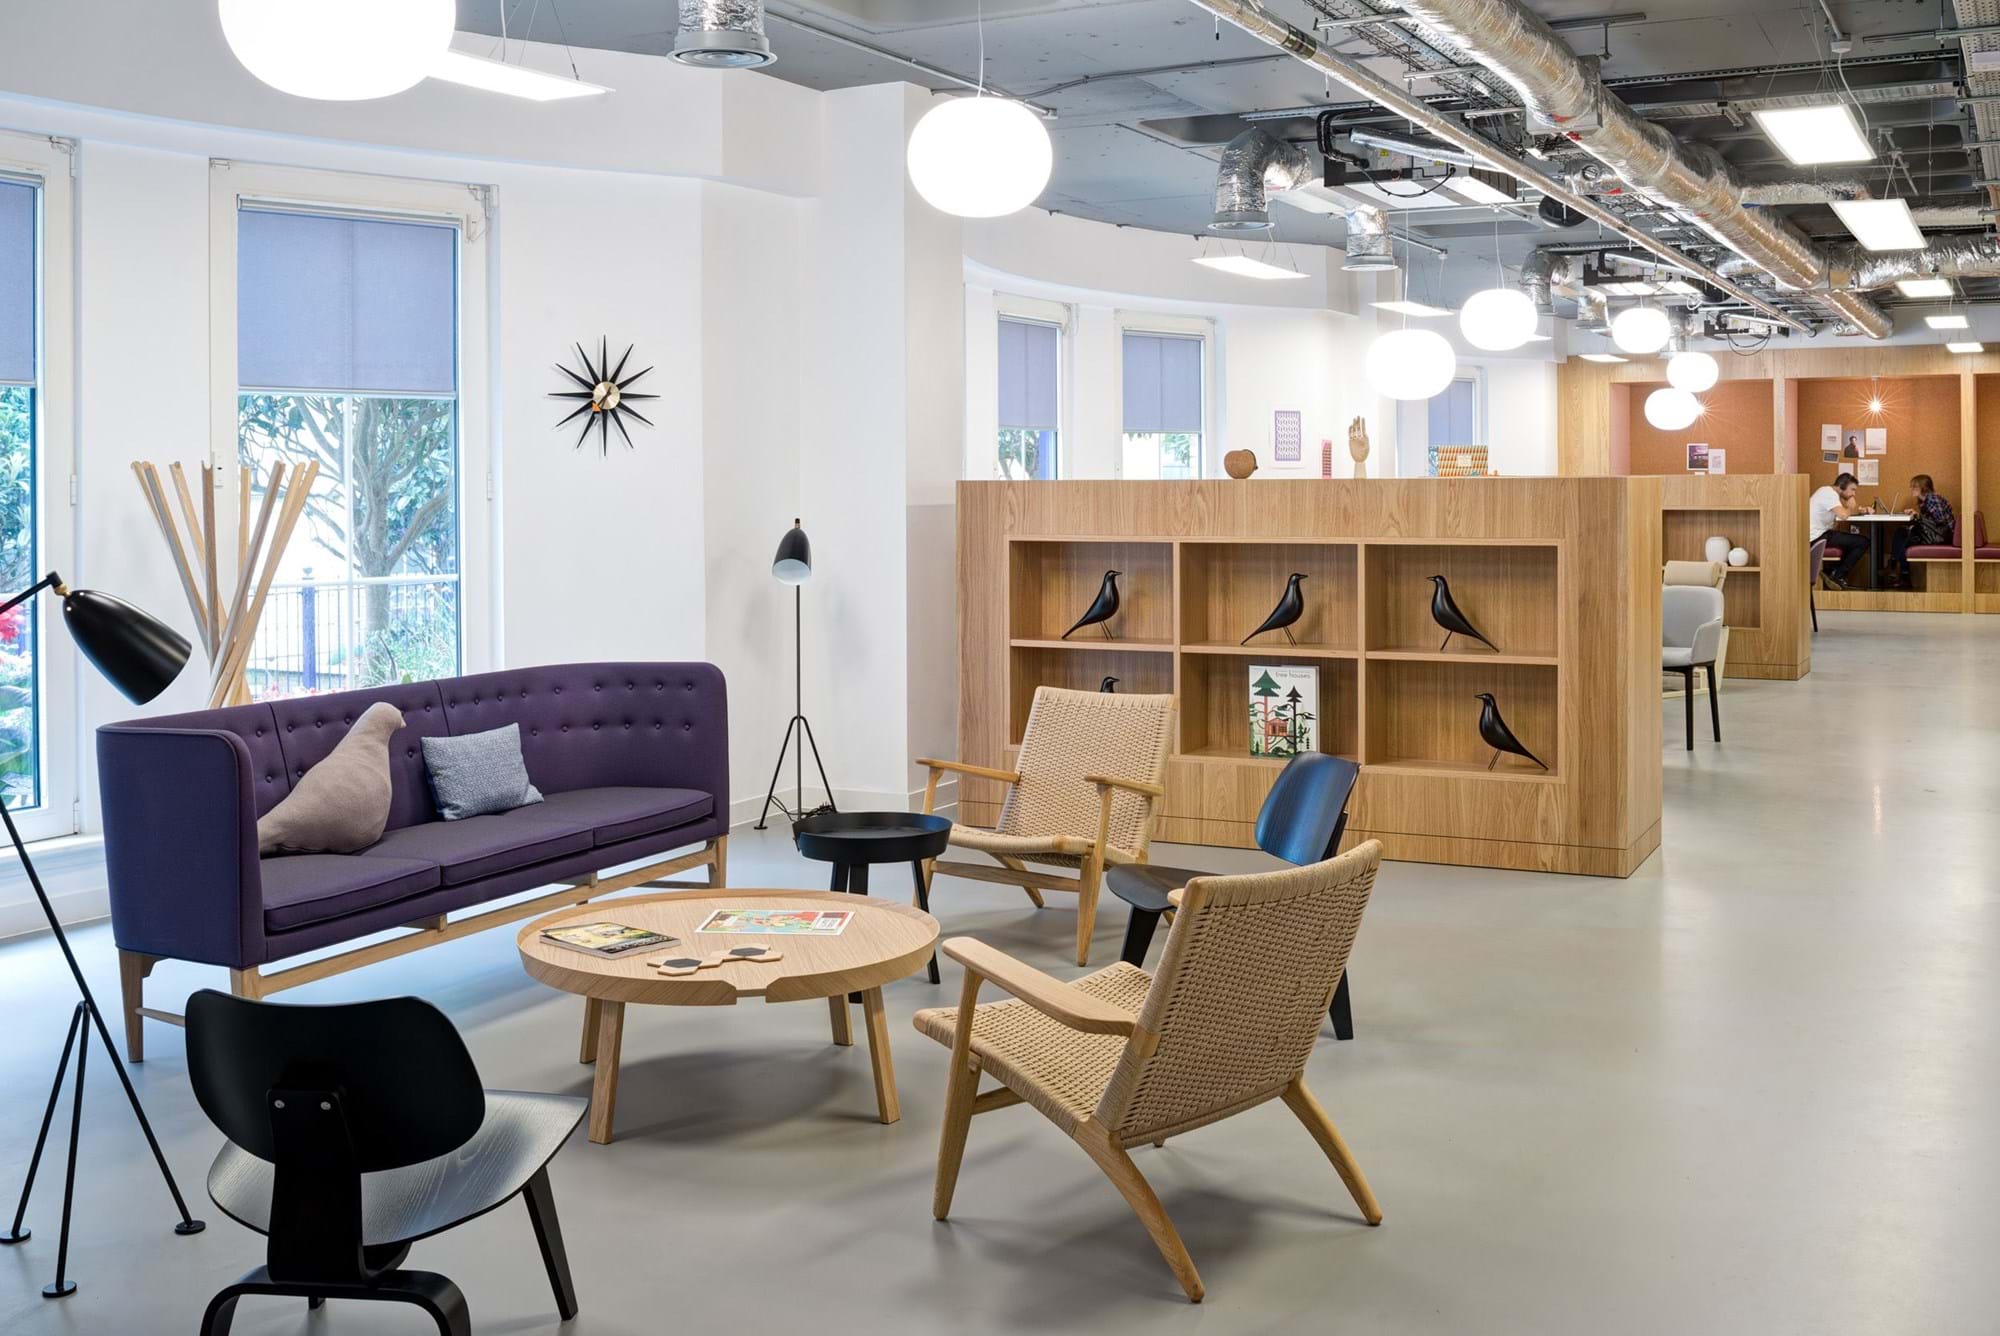 Modus Workspace office design, fit out and refurbishment - Spaces - Brighton - Spaces Brighton 3 highres sRGB.jpg